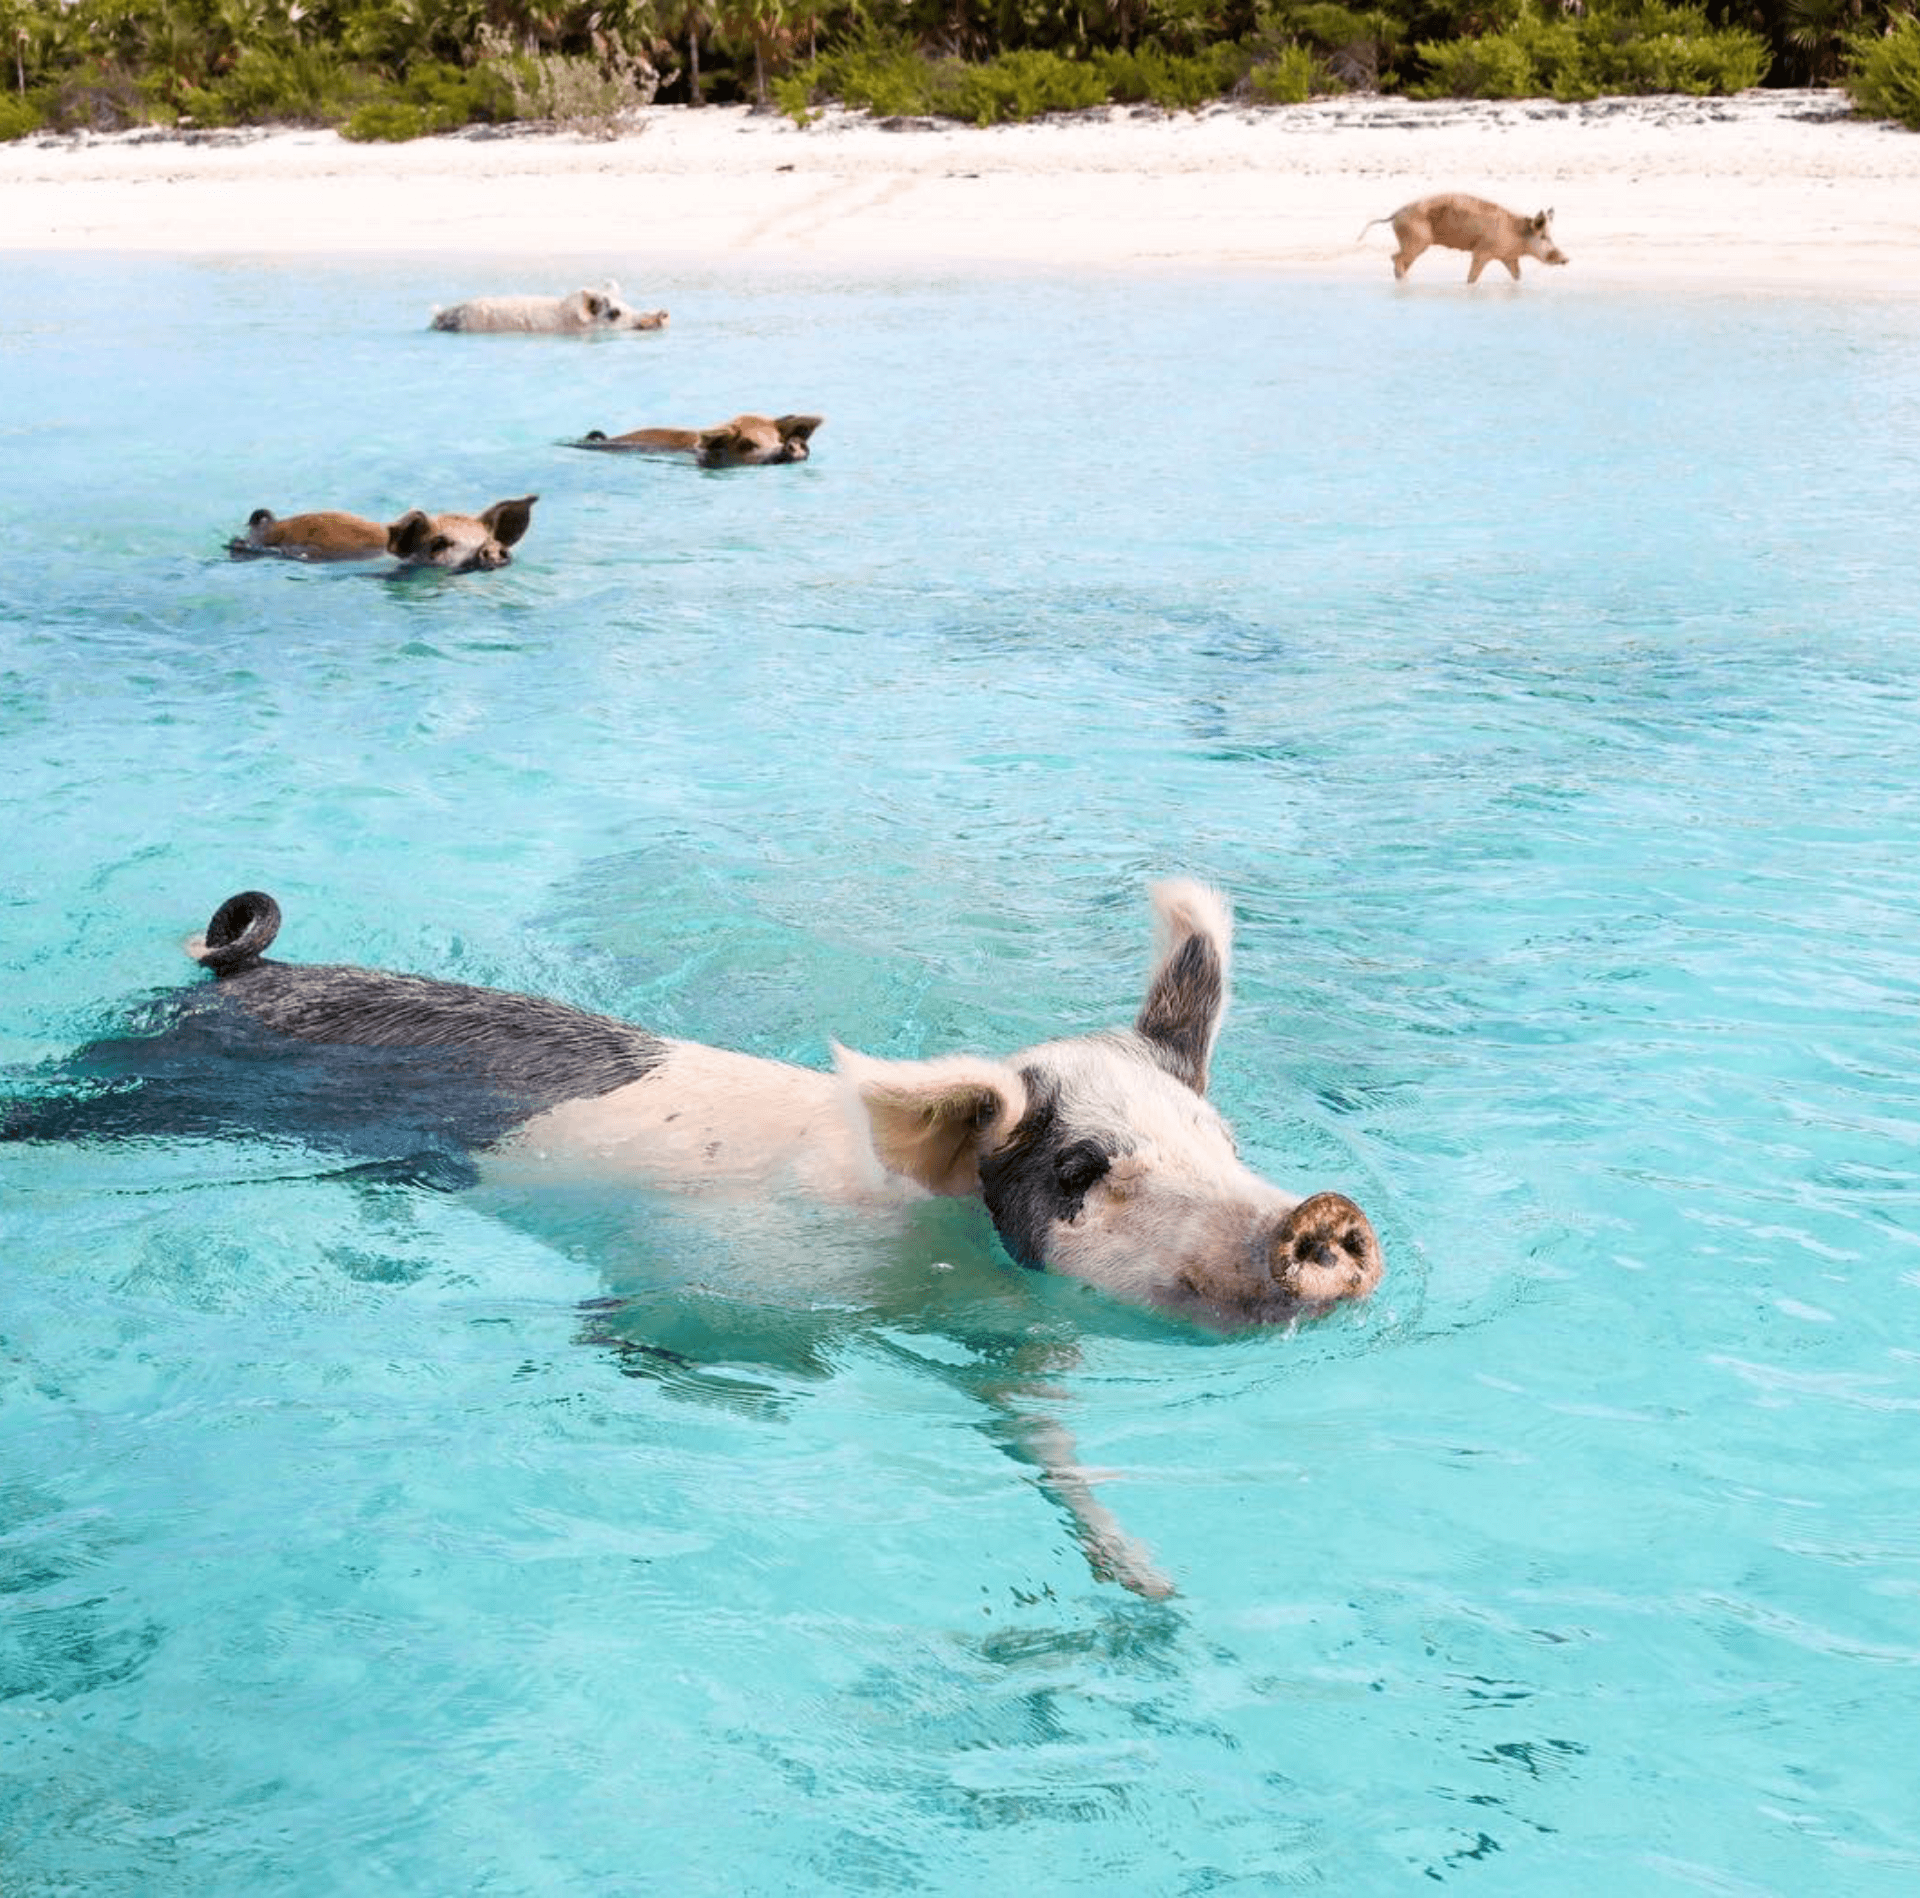 Pigs in the water of Bahamas island